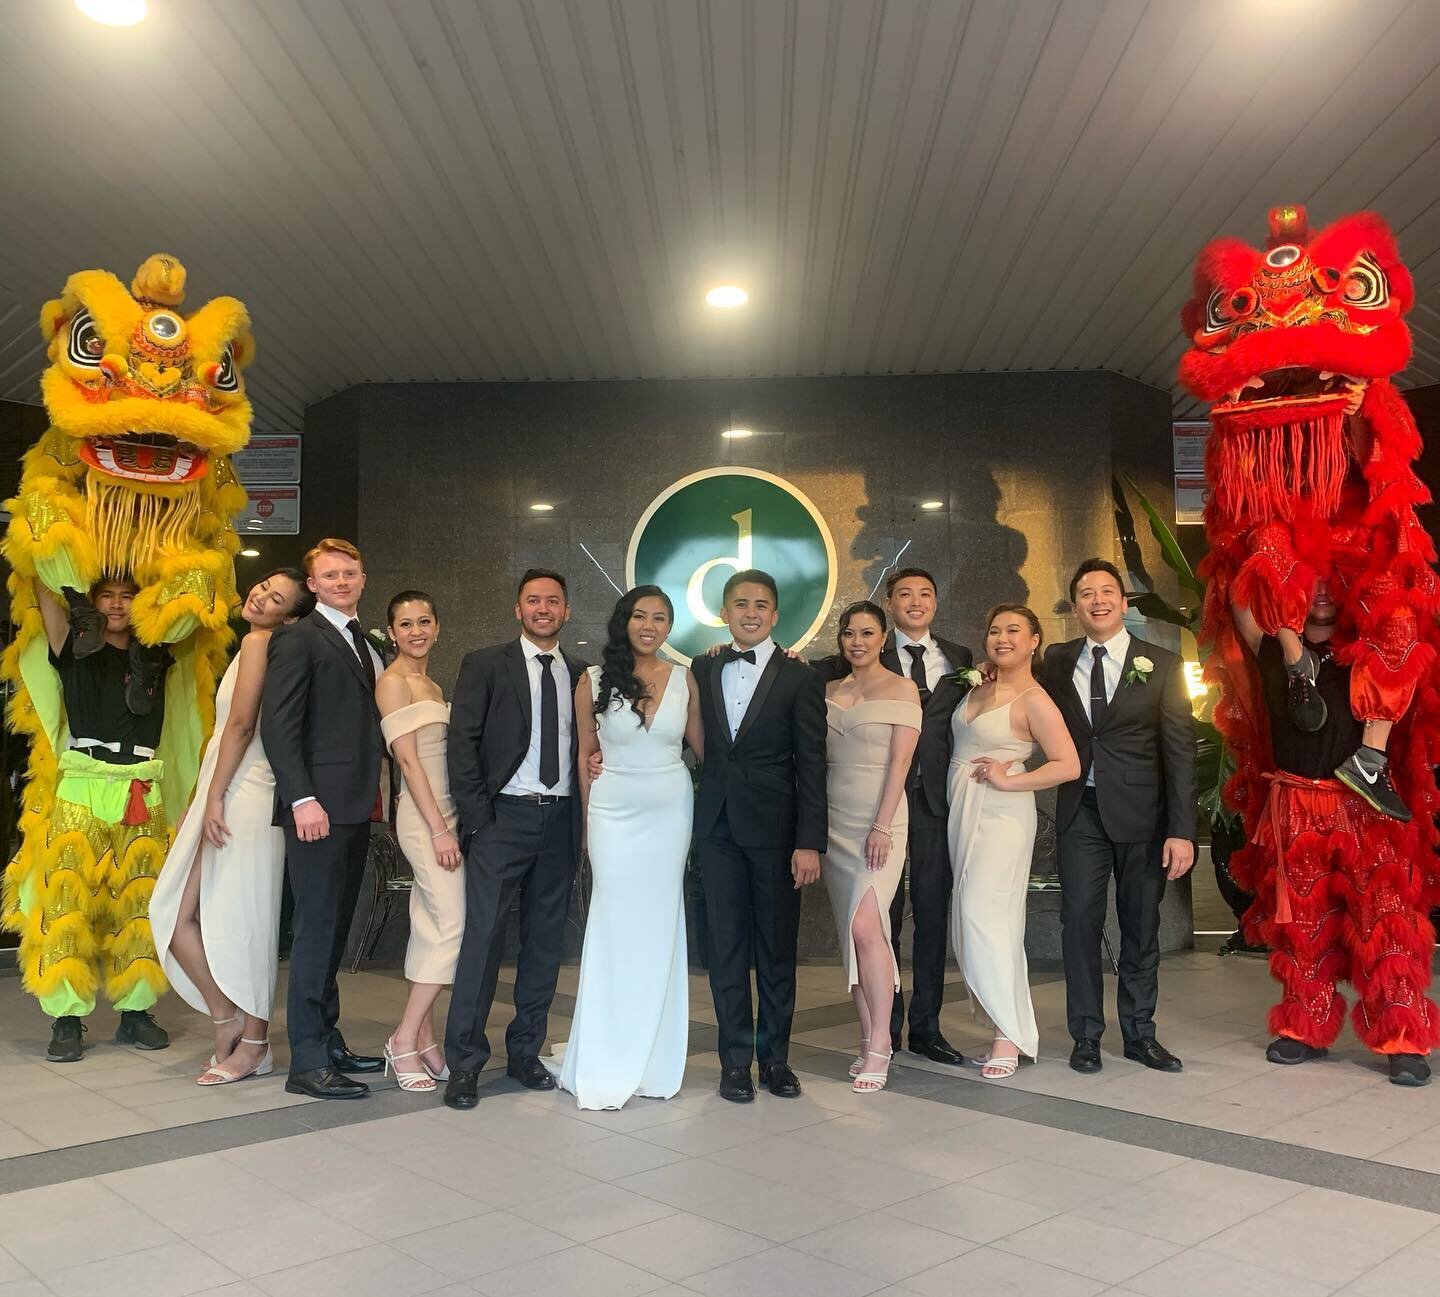 Congratulations to the beautiful couple Sorinda &amp; Steven Nguyen!! 💛🦁❤️ 

You tied the knot! We wish you prosperity and good fortune for your future endeavours 

#LoveIsInTheAir #LionsNotDragons